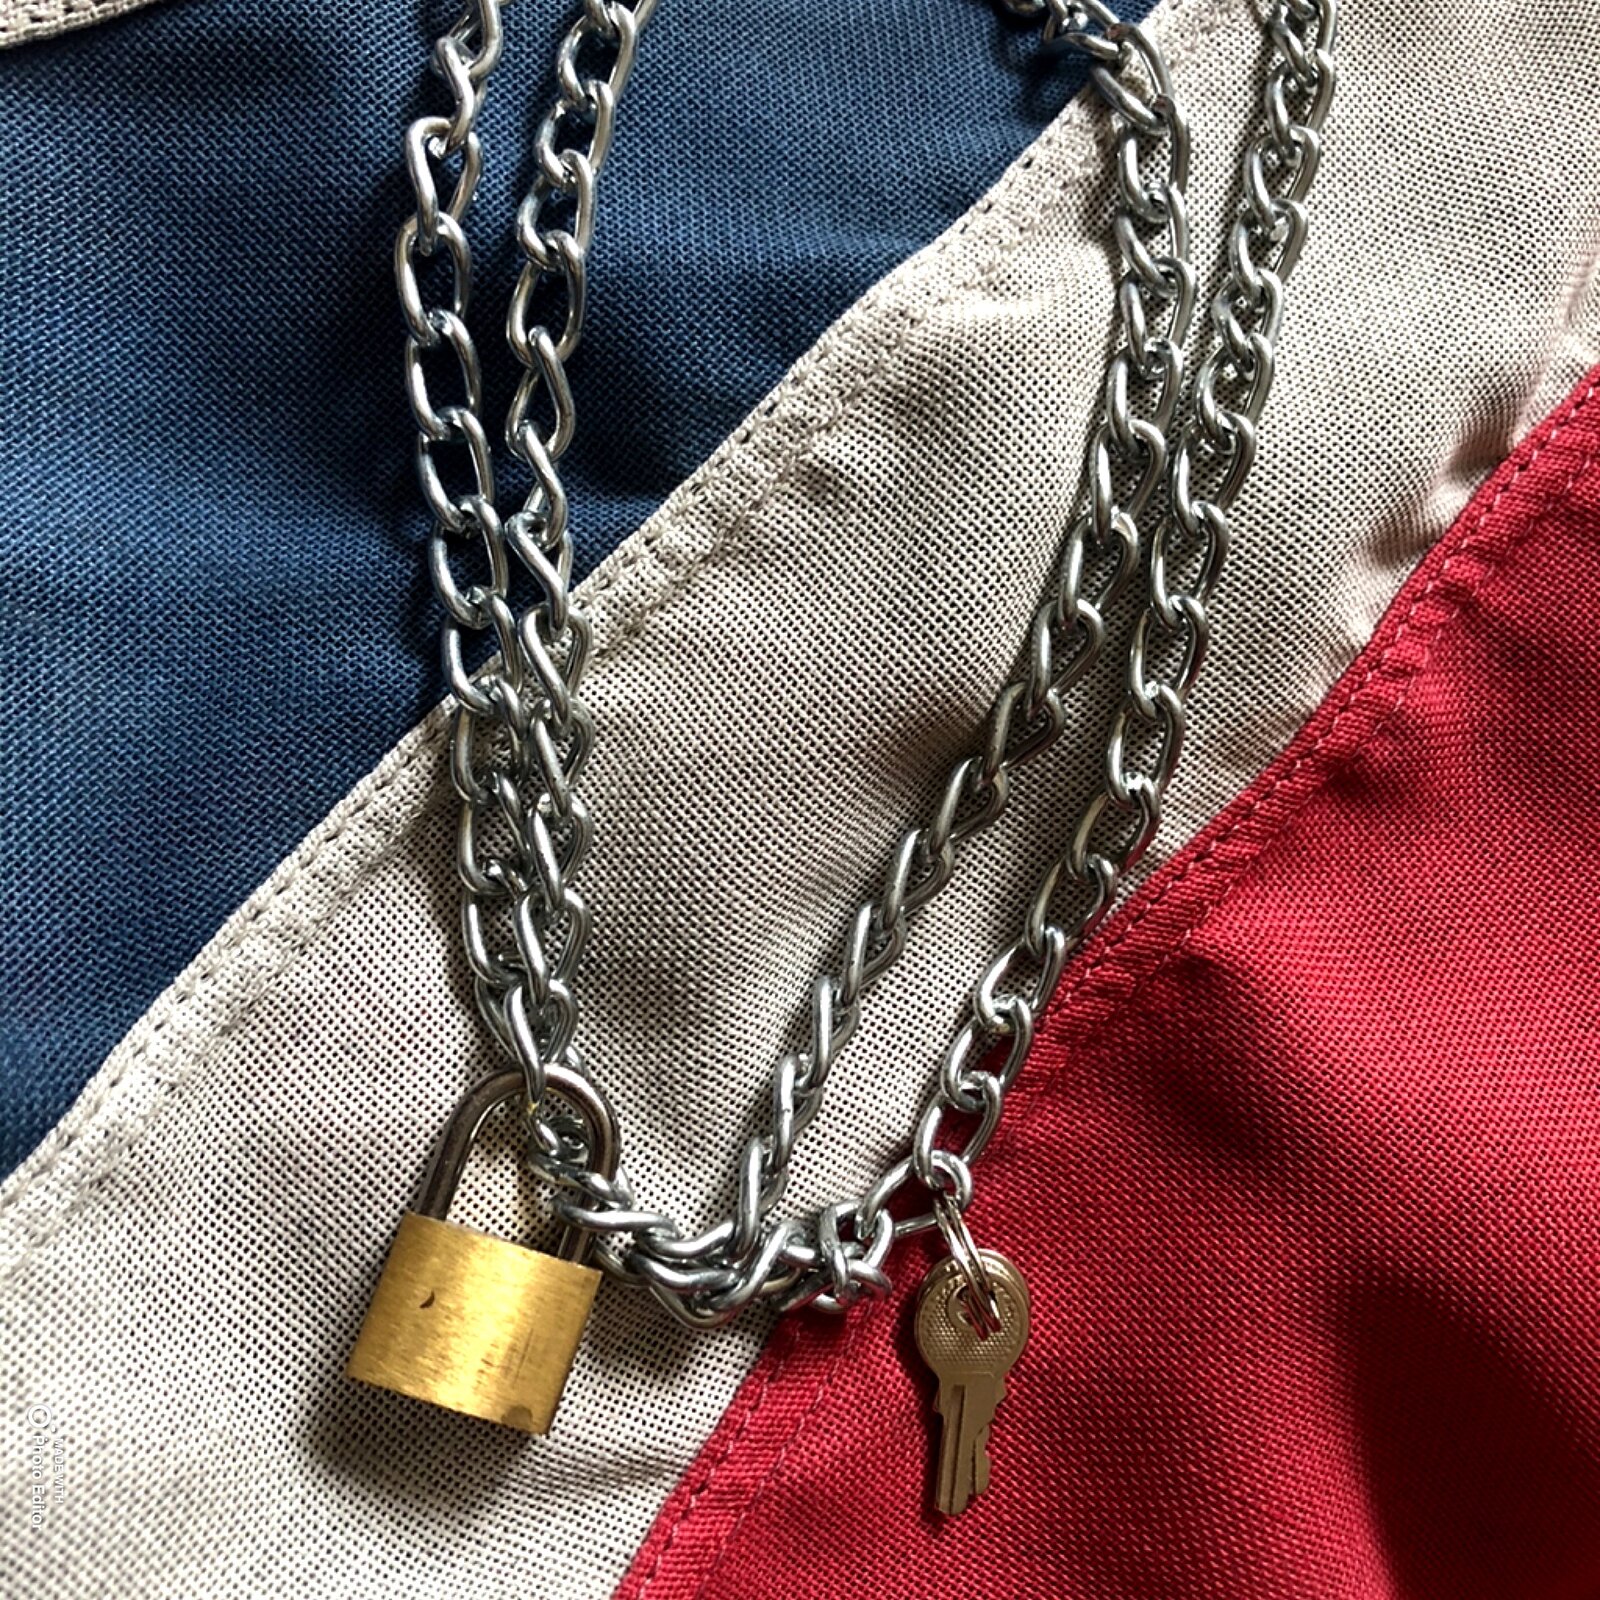 Chain and padlock necklace